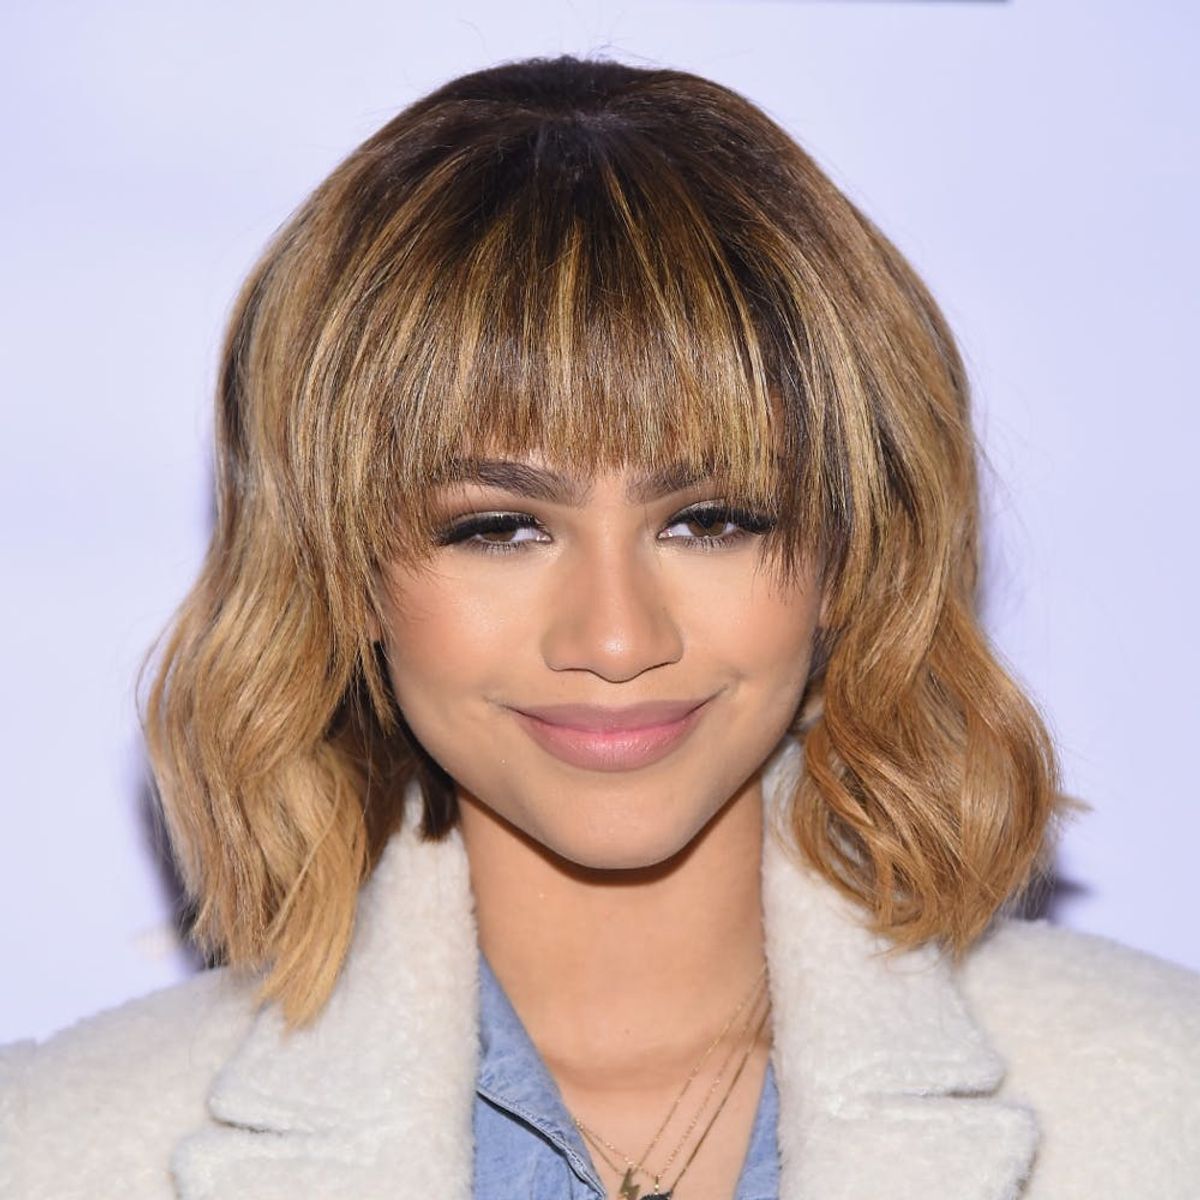 Zendaya Could Be Playing THIS Role in the New Spider-Man Reboot